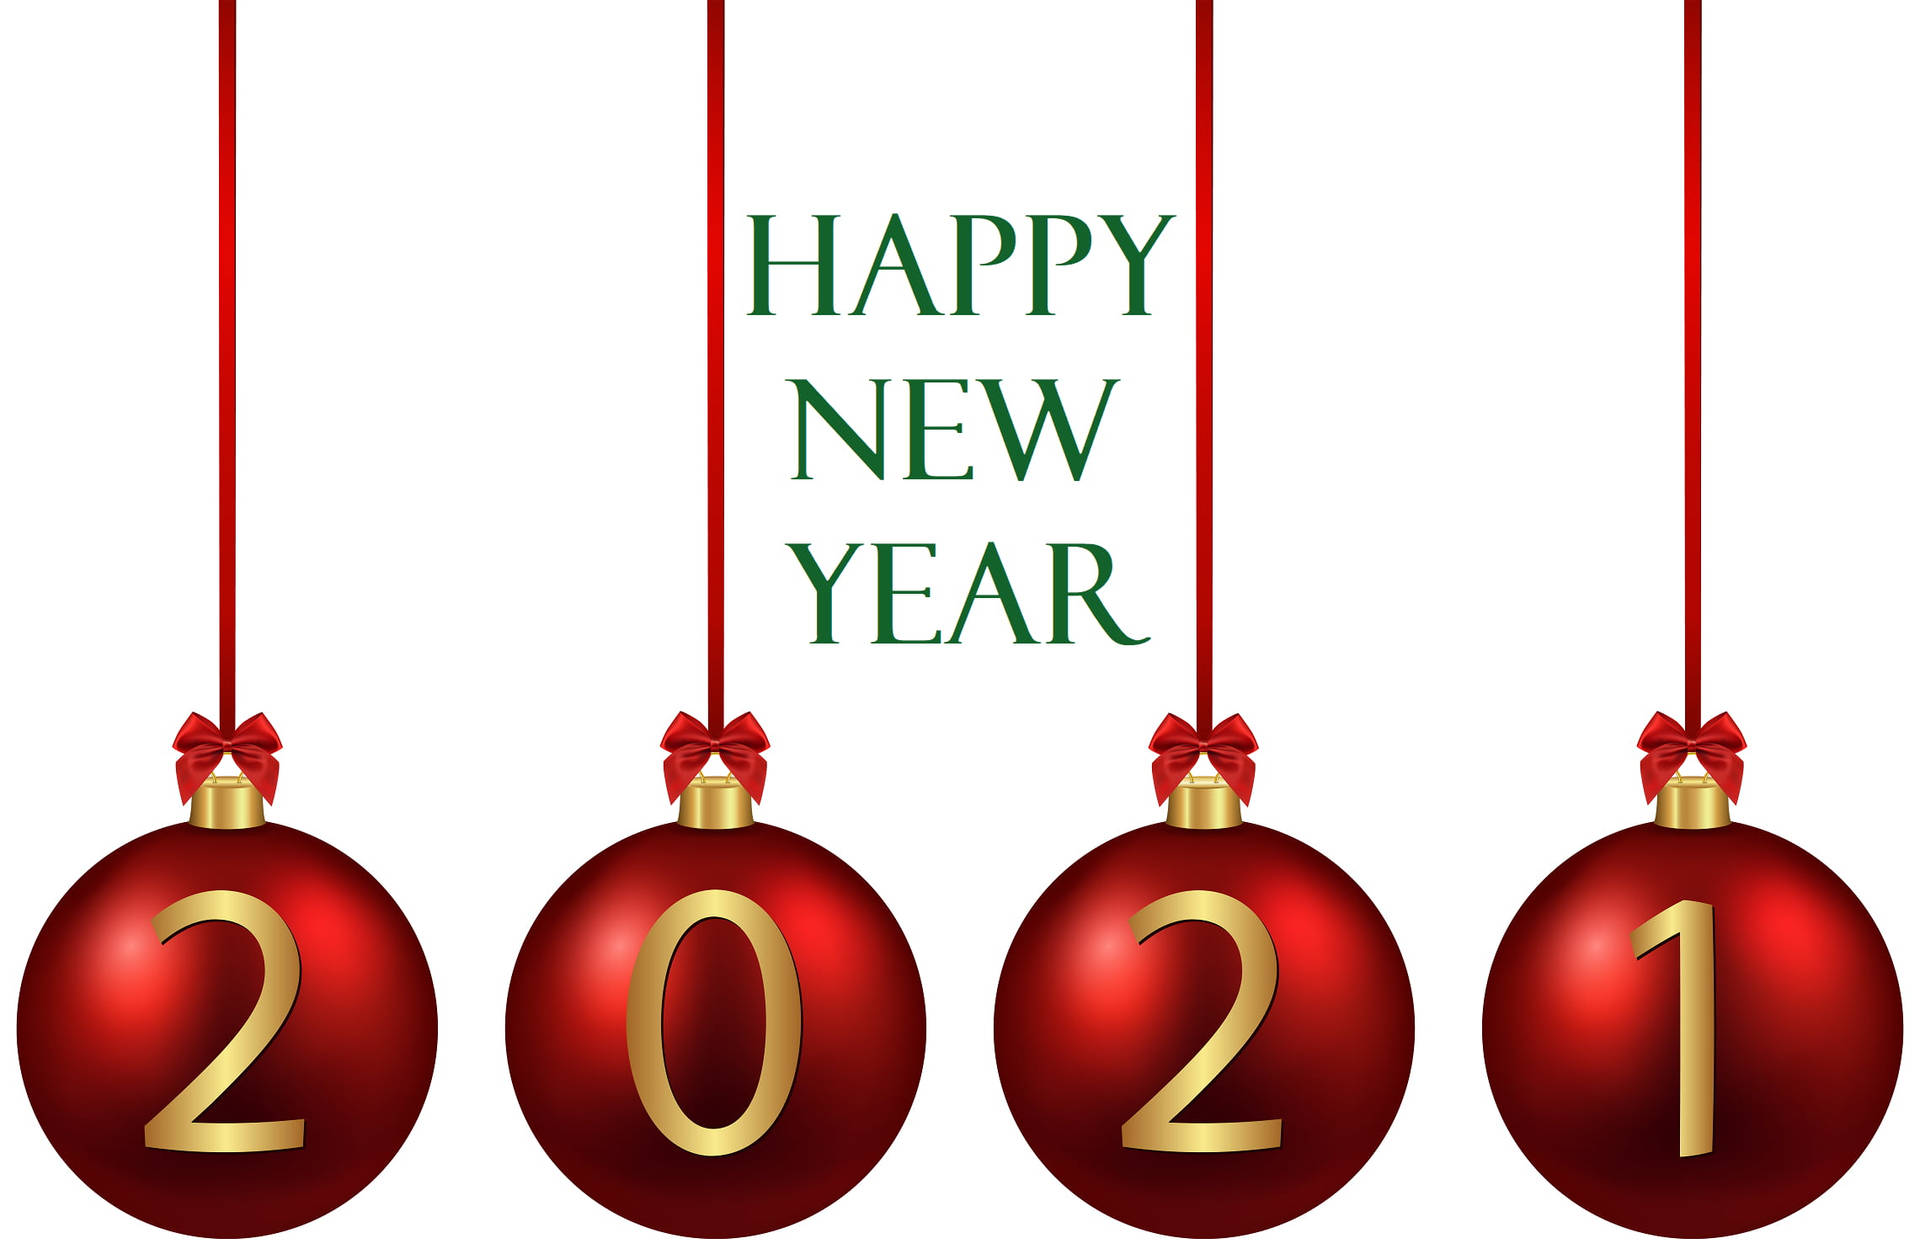 Happy New Year 2021 Greeting With Christmas Balls Background